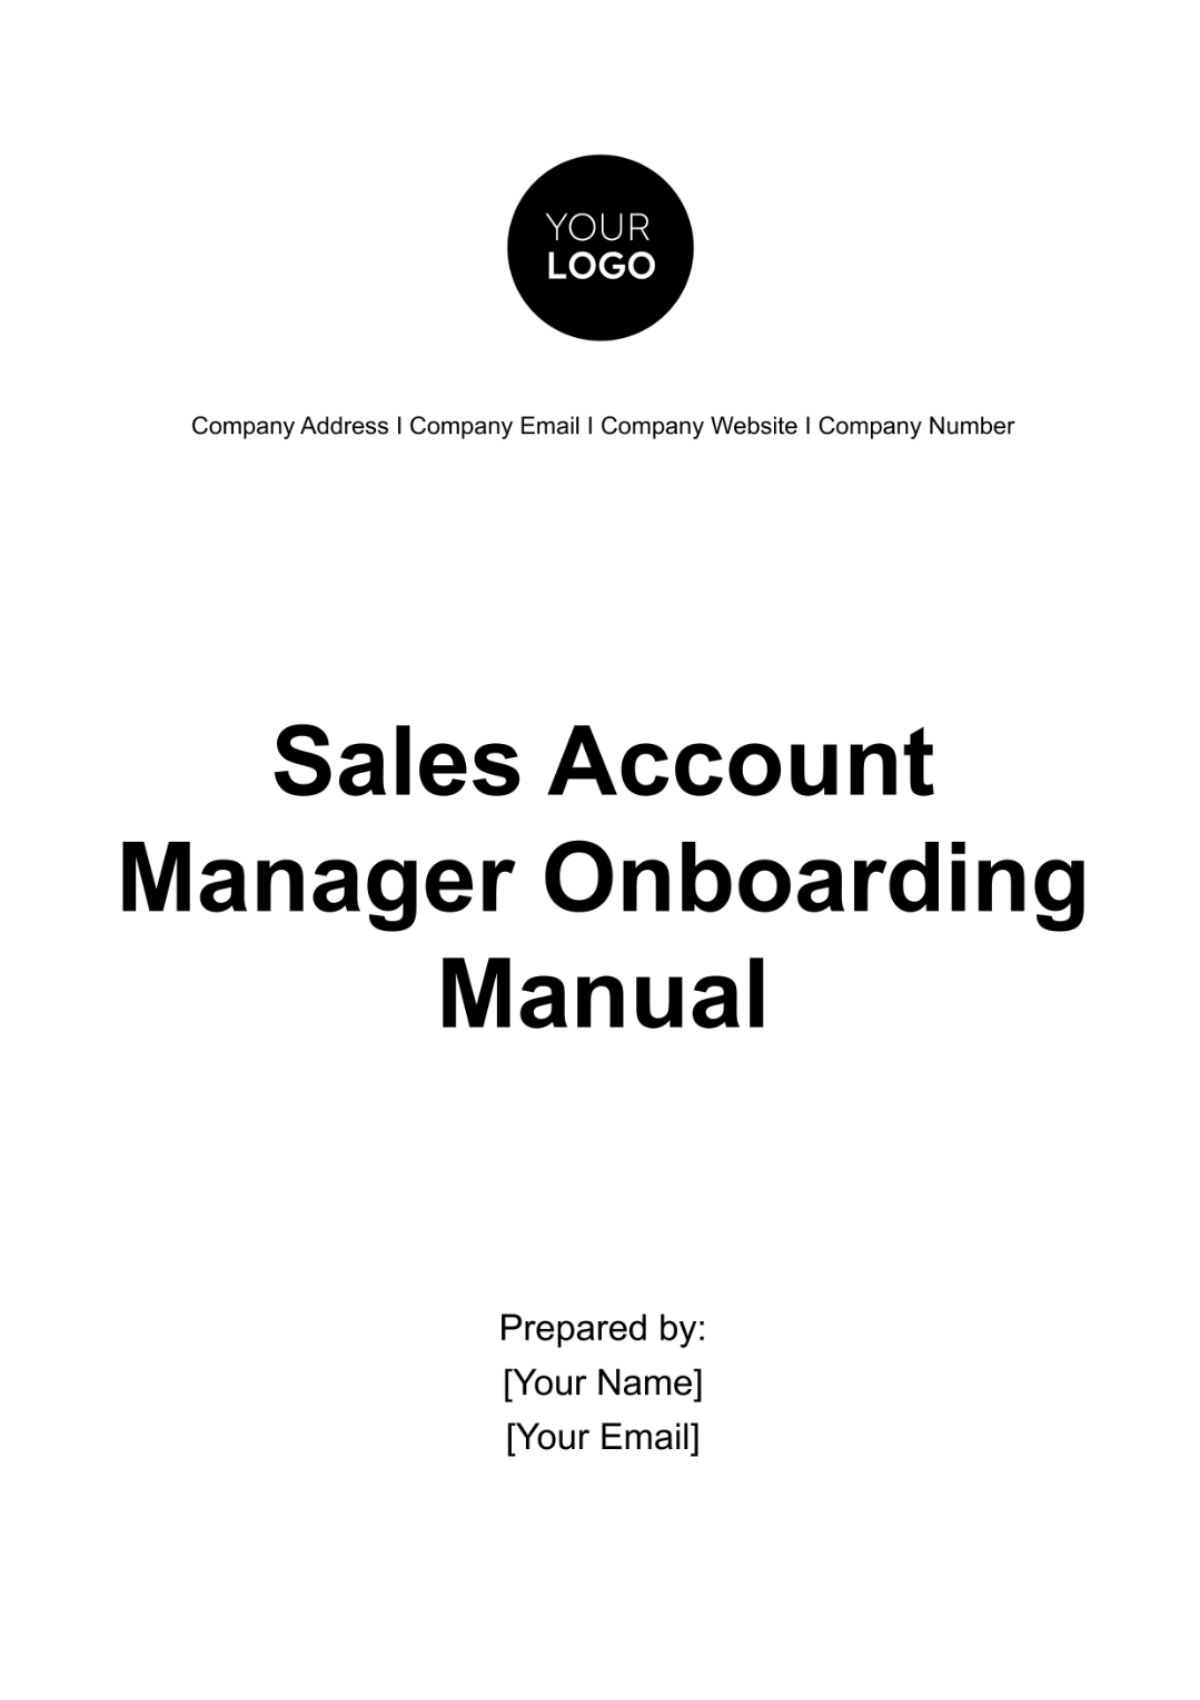 Sales Account Manager Onboarding Manual Template